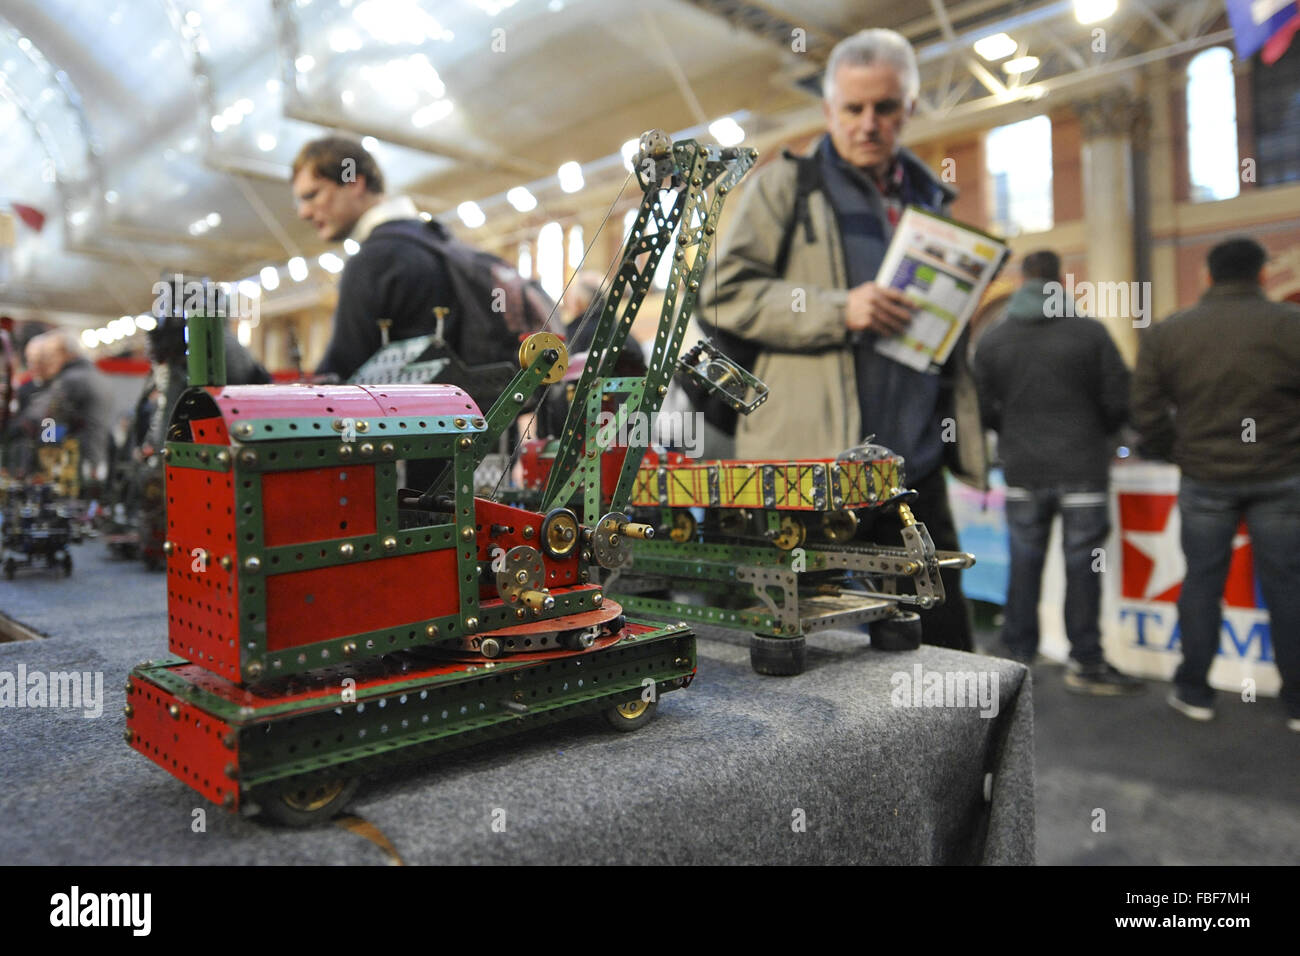 London, UK. 15th Jan, 2016. Men looking at a Meccano models on display at the London Model Engineering Exhibition which opened today at Alexandra Palace, London. Credit:  Michael Preston/Alamy Live News Stock Photo